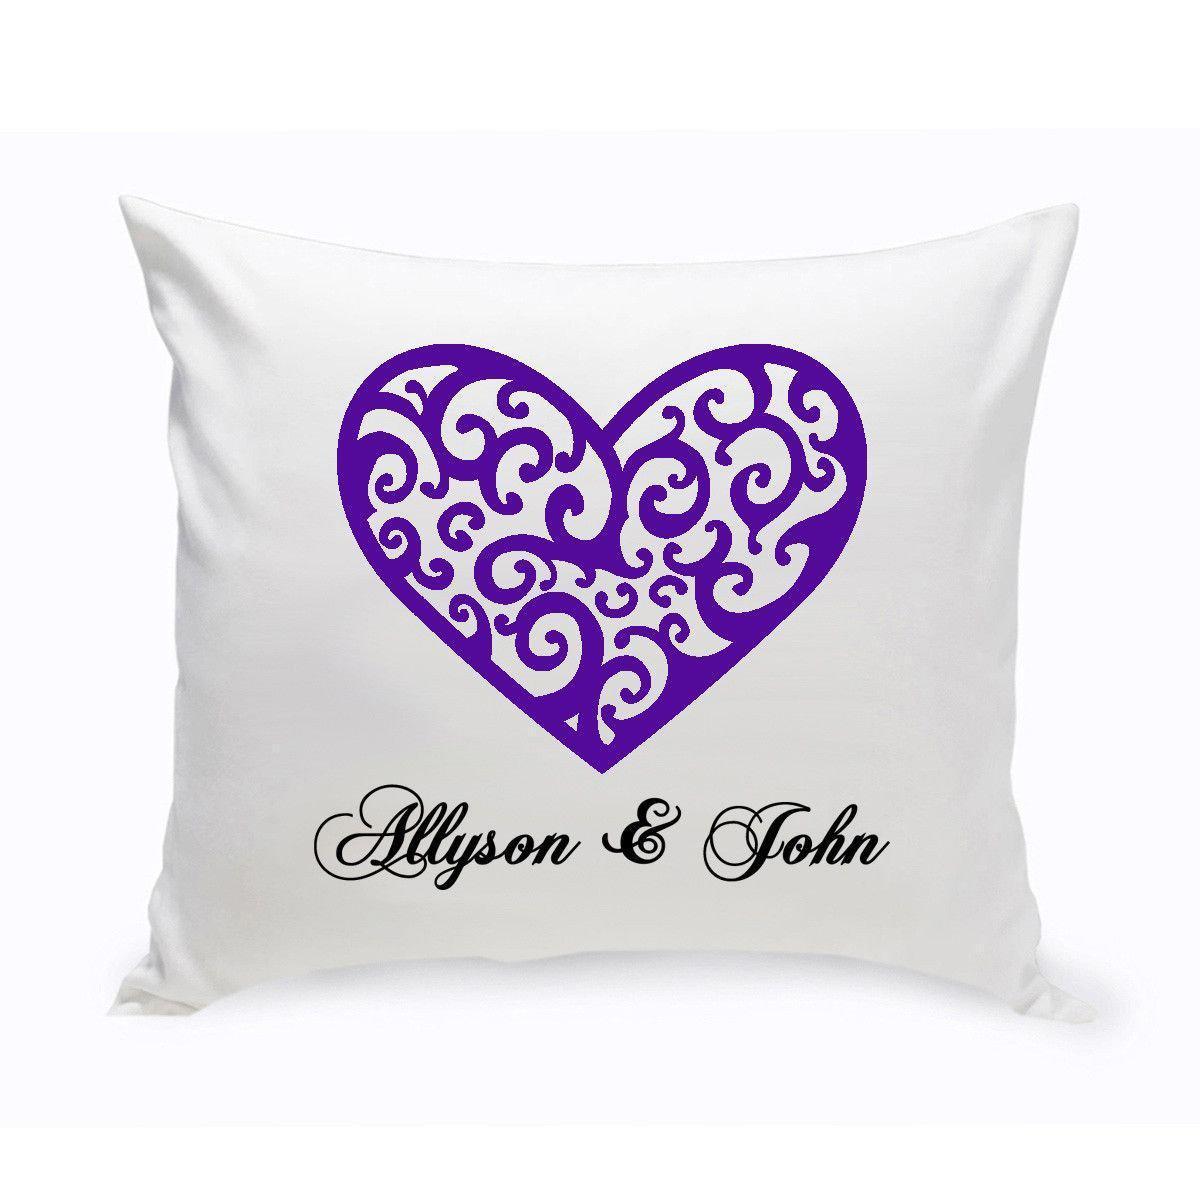 Personalized Throw Pillows - Personalized Couples Unity Vintage Heart